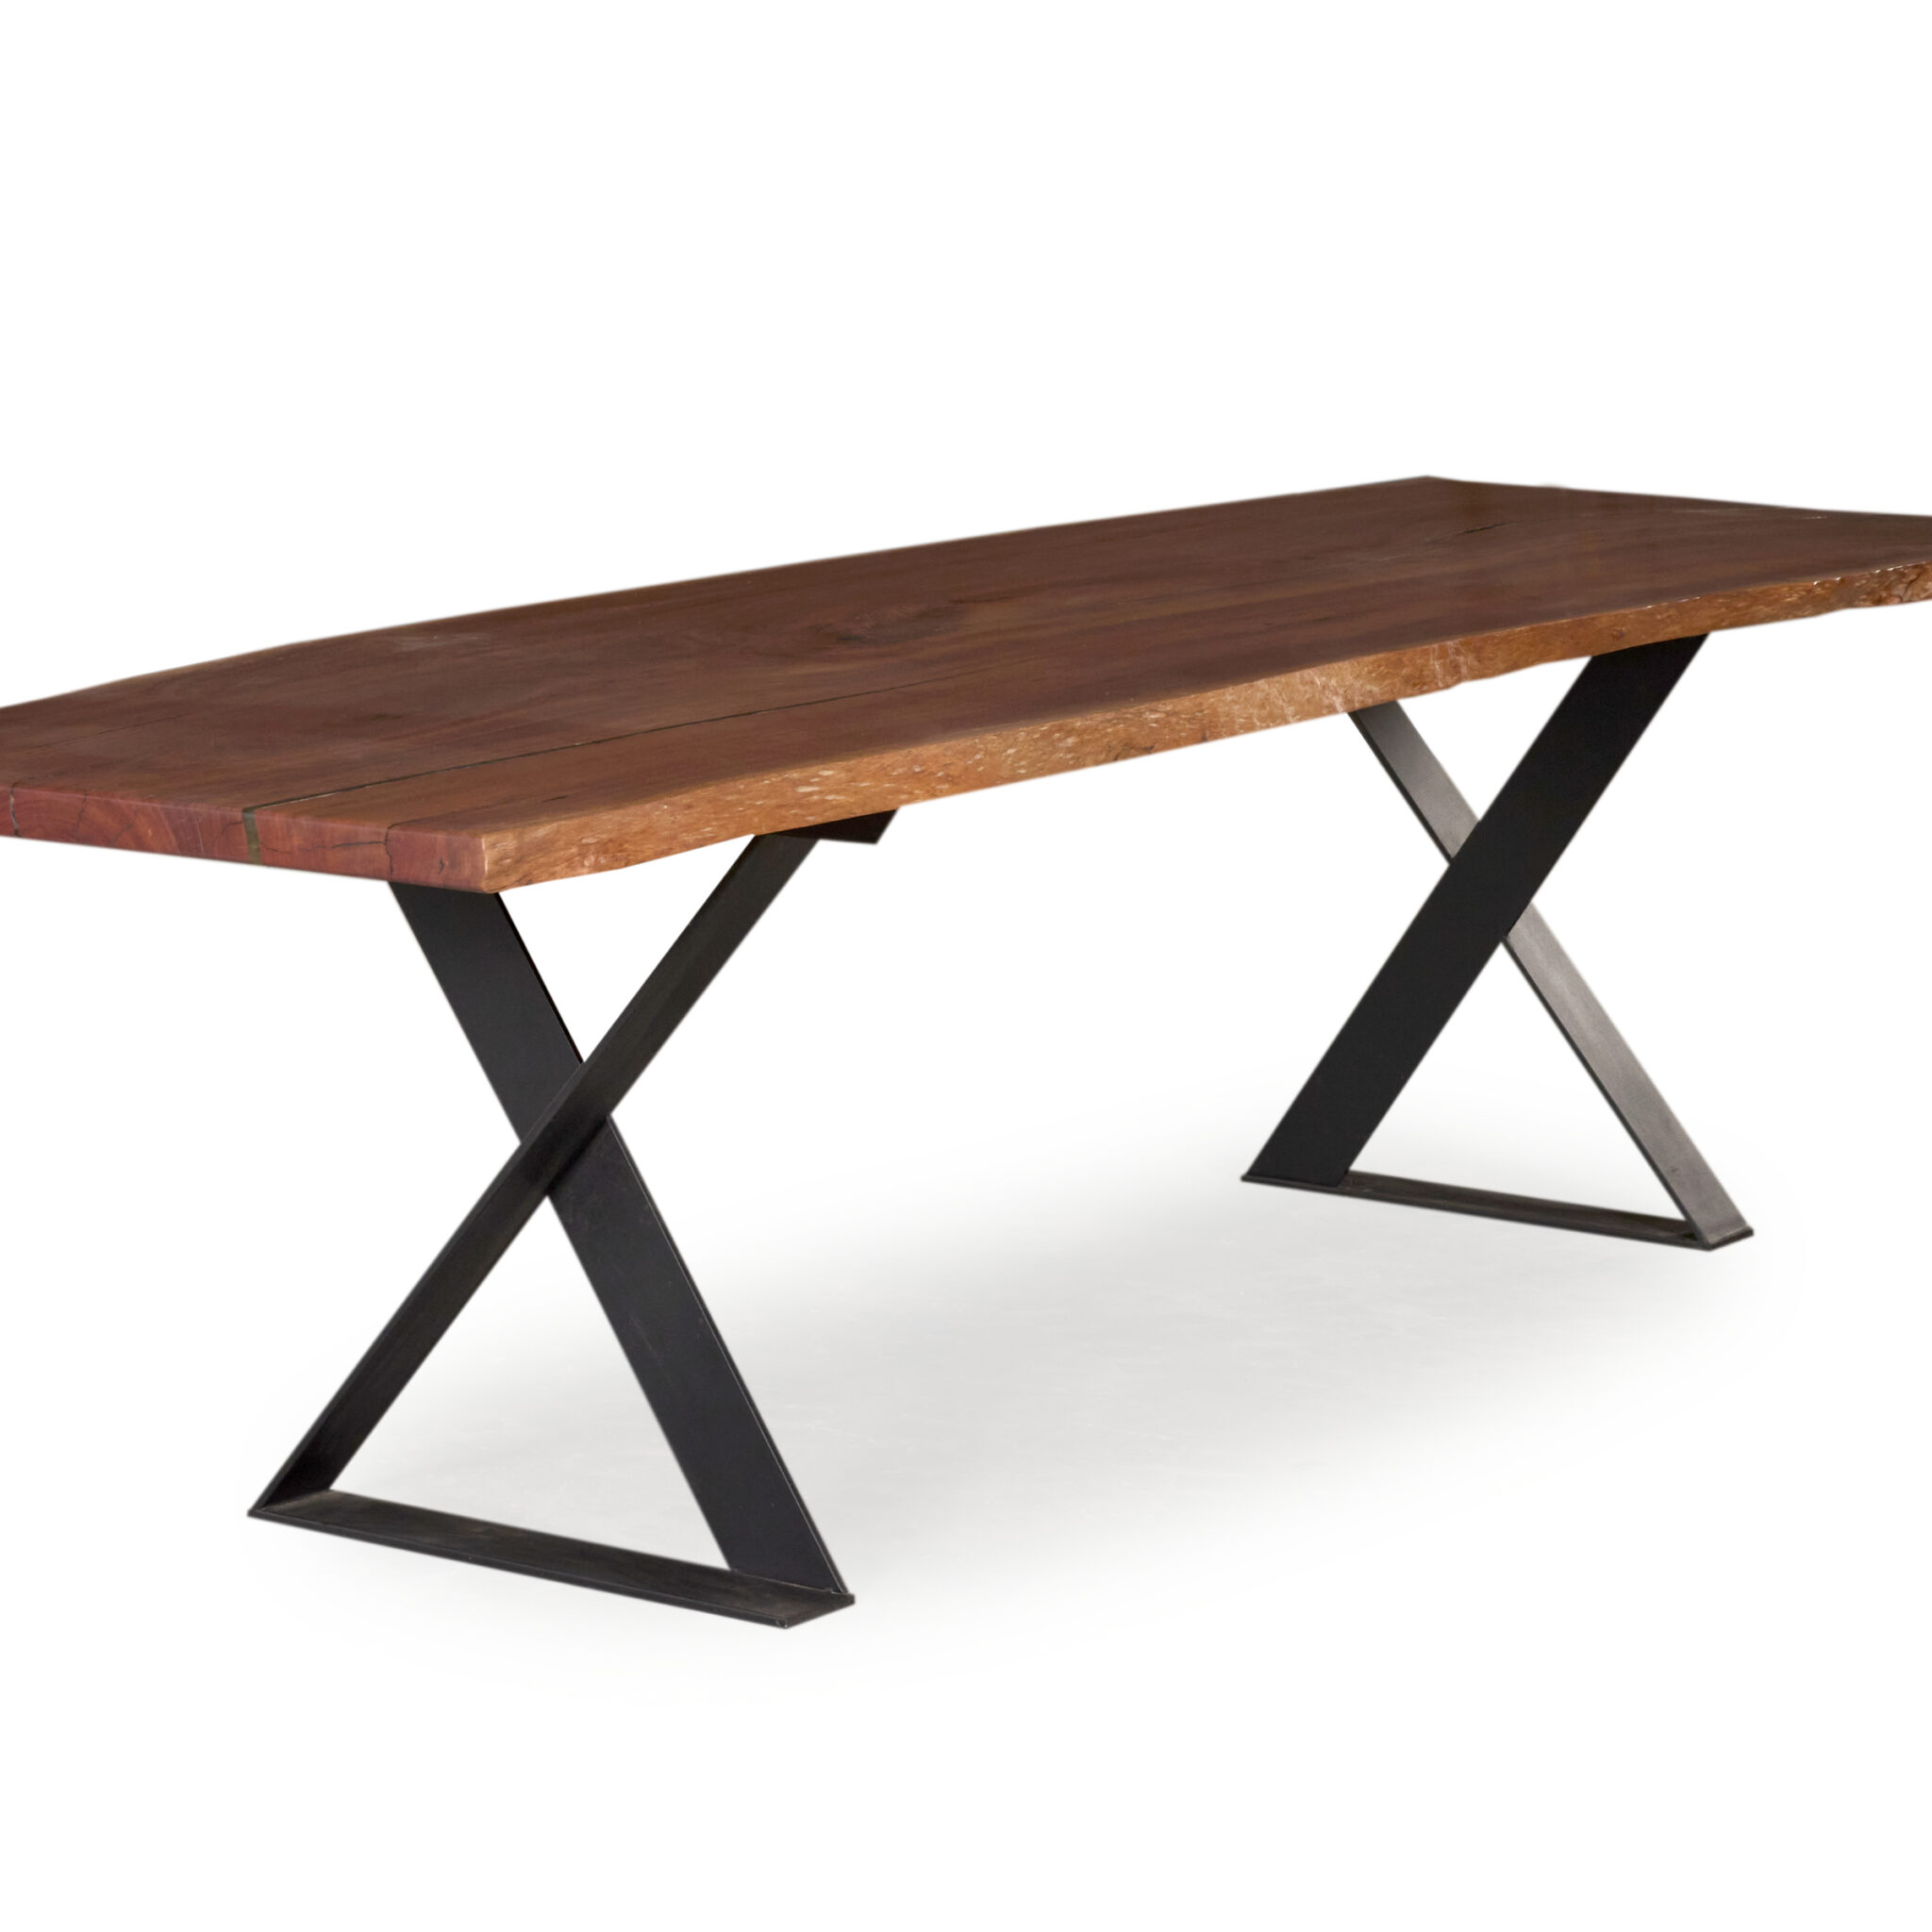 Vaucluse Dining Table Redgum timber with sleek X leg steel black base and natural edge